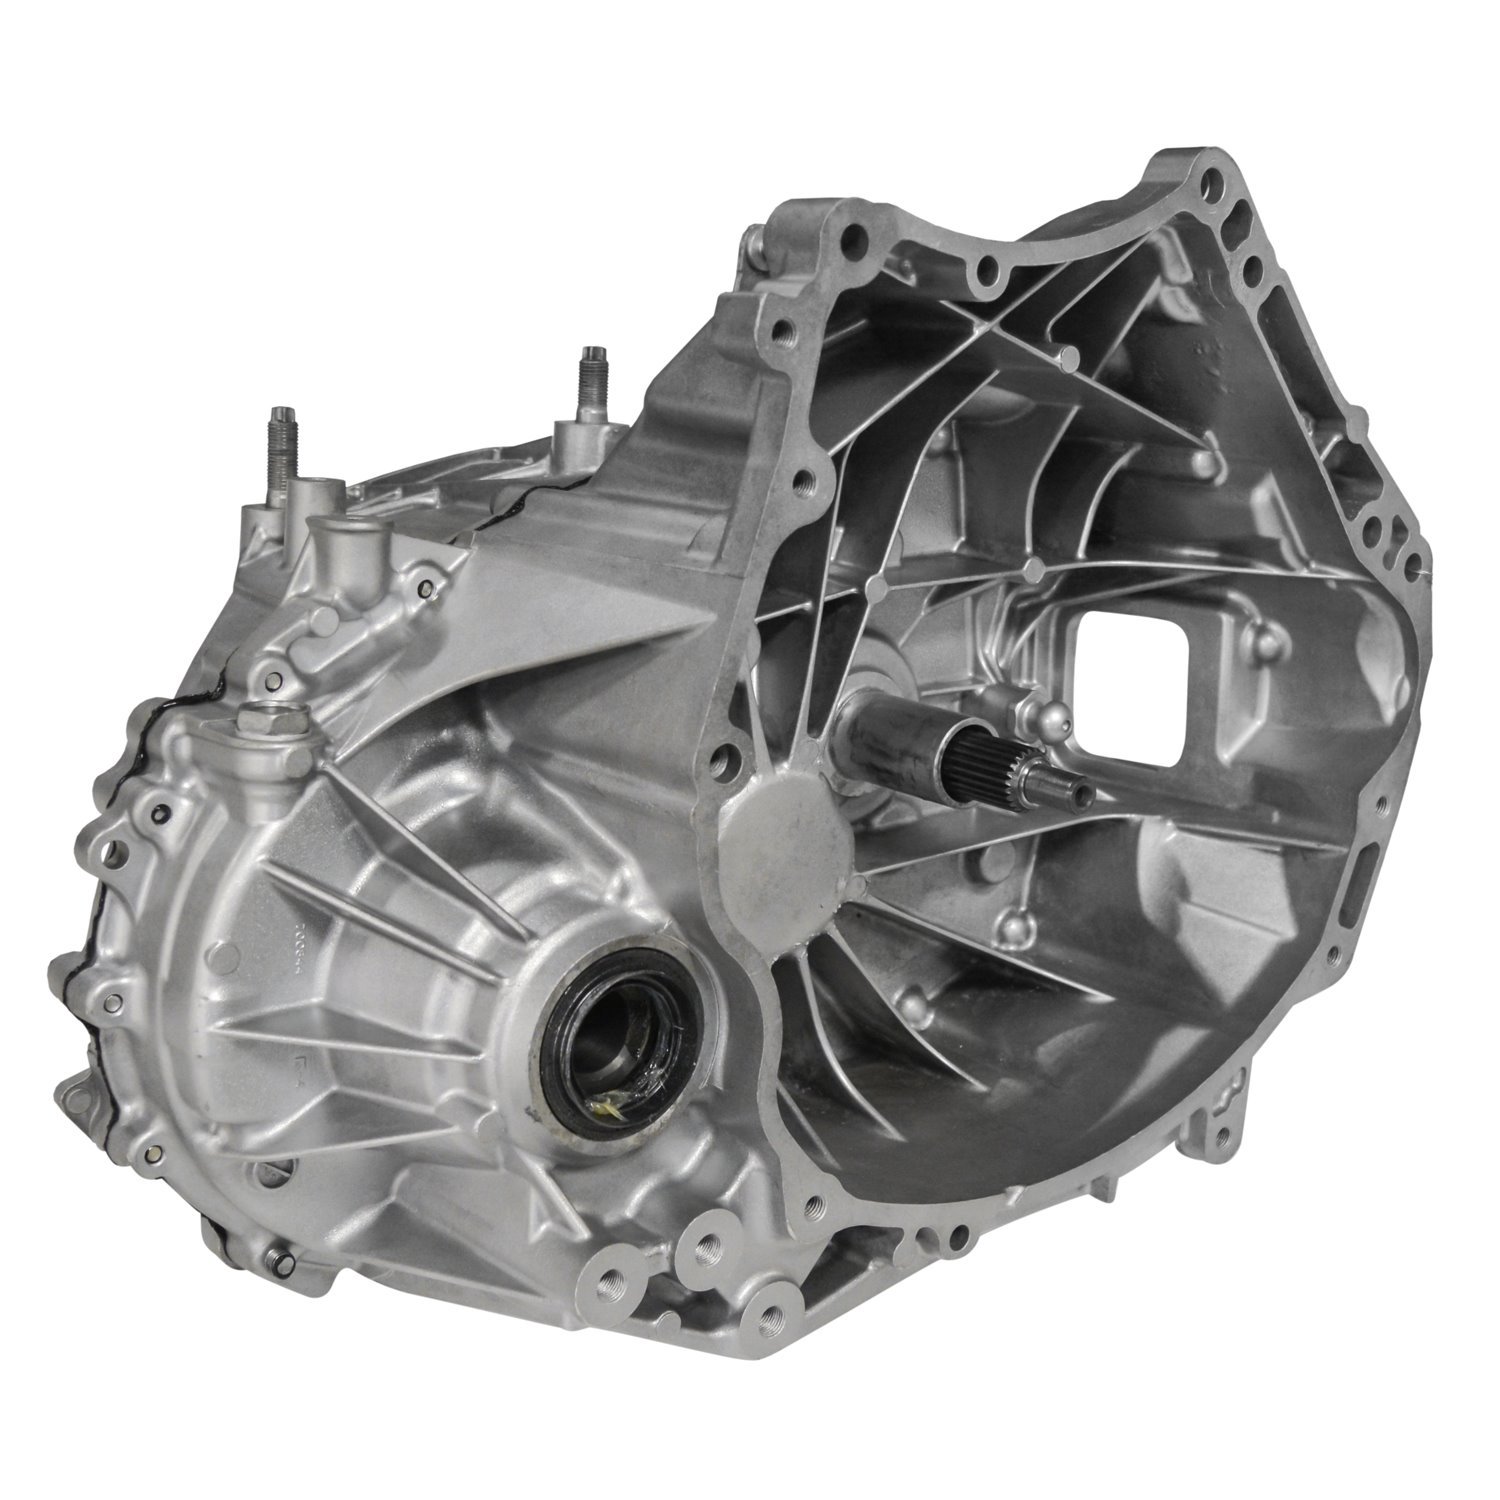 Remanufactured 6-Speed Manual Transmission for 2012-2013 Mazda 3 with 3.2L Engine